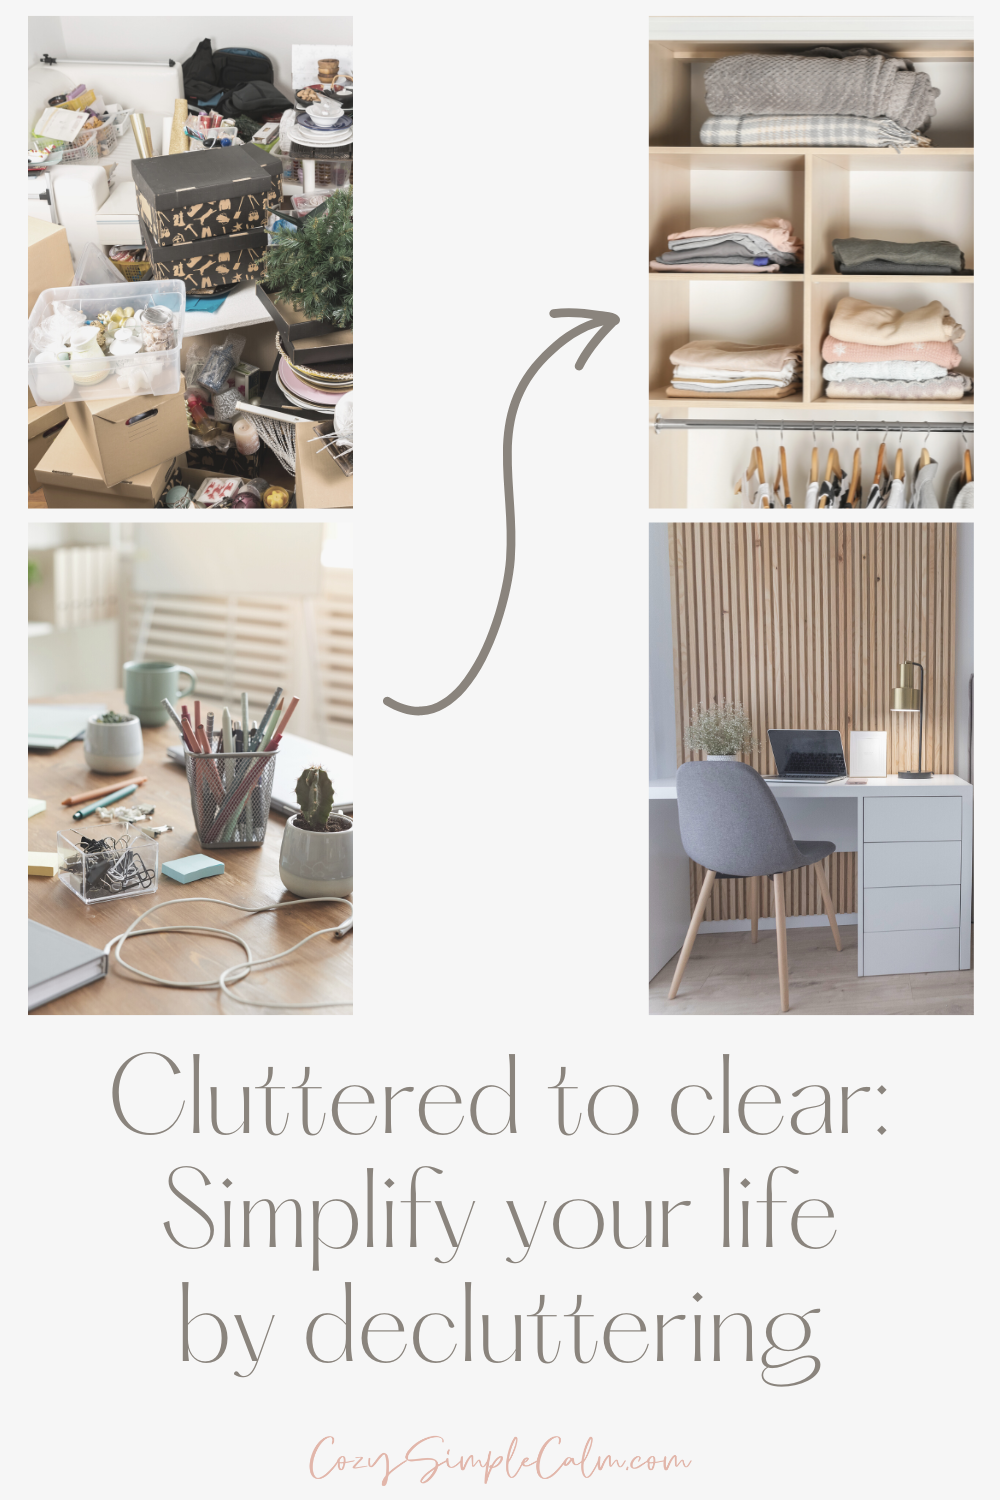 Images of cluttered rooms next to clean rooms - Text overlay: Cluttered to clear: Simplify your life by decluttering